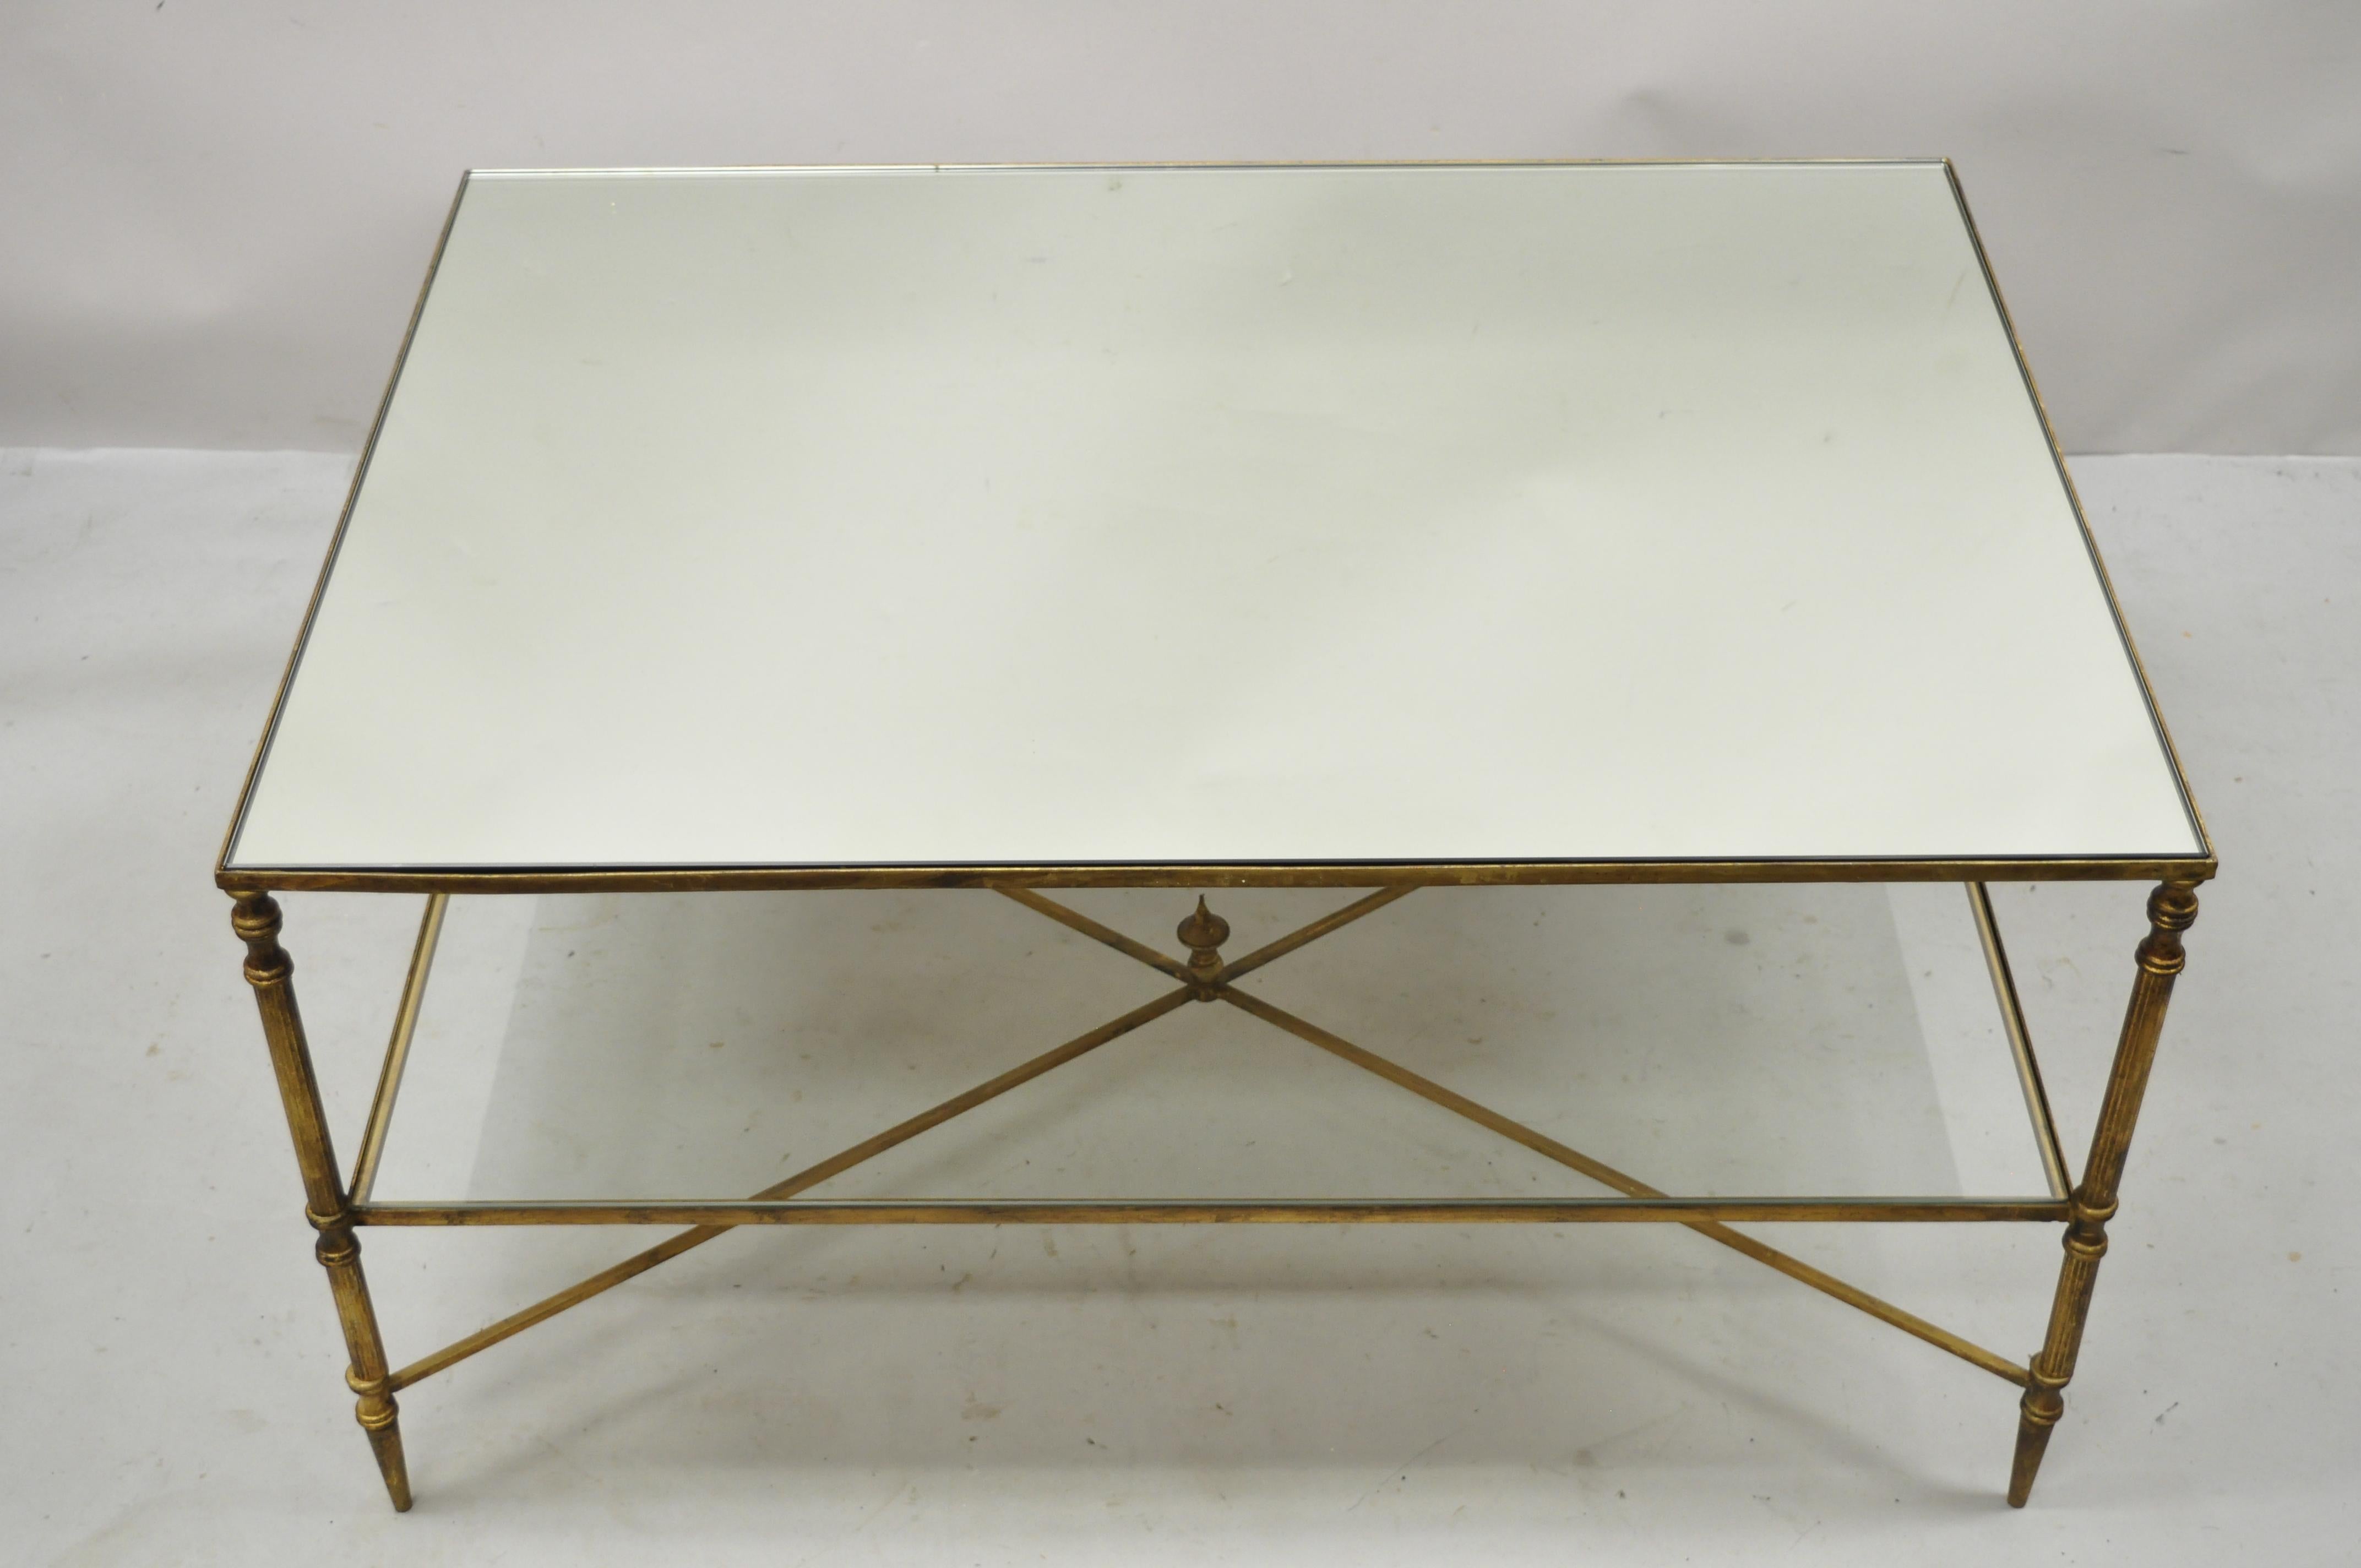 Vintage Italian Hollywood Regency gold iron frame coffee table with mirror top. Item features mirror glass top, clear glass lower shelf, iron frame, gold distressed finish, cross stretcher base, very nice vintage item, great style and form. Circa